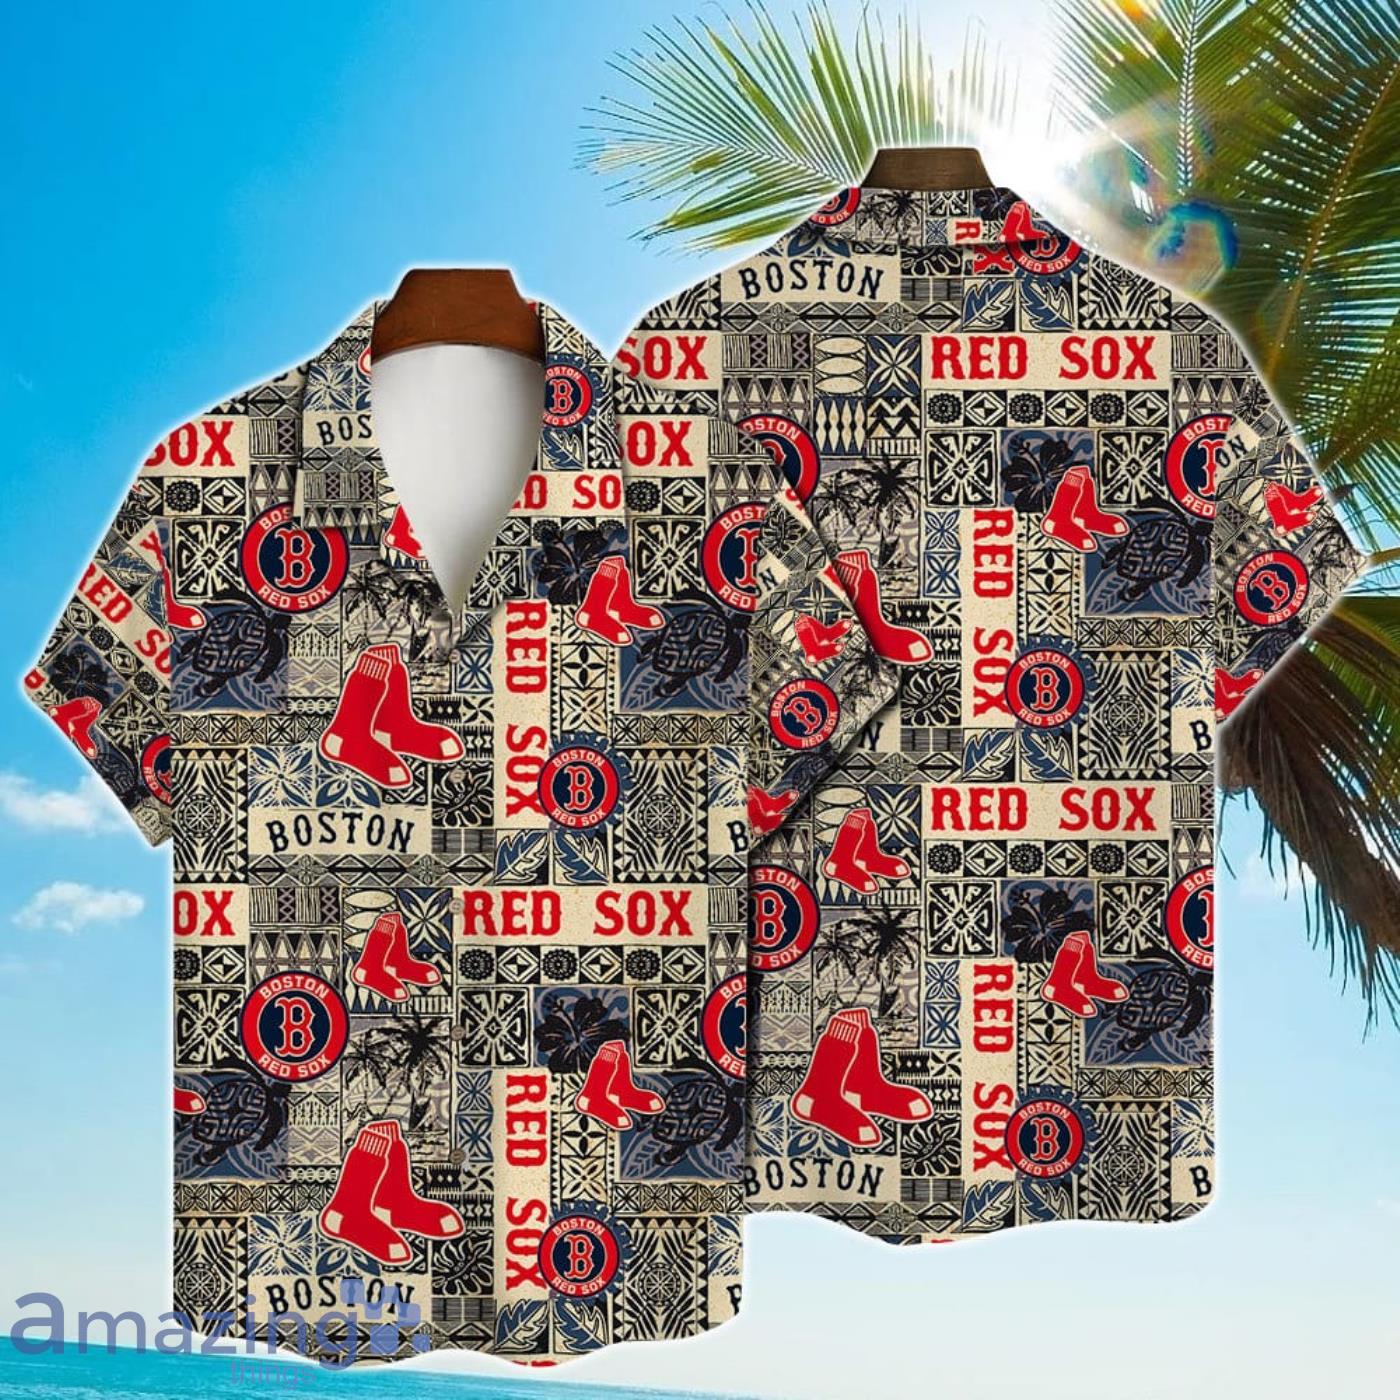 Boston Red Sox Apparel, Red Sox Gear, Merchandise